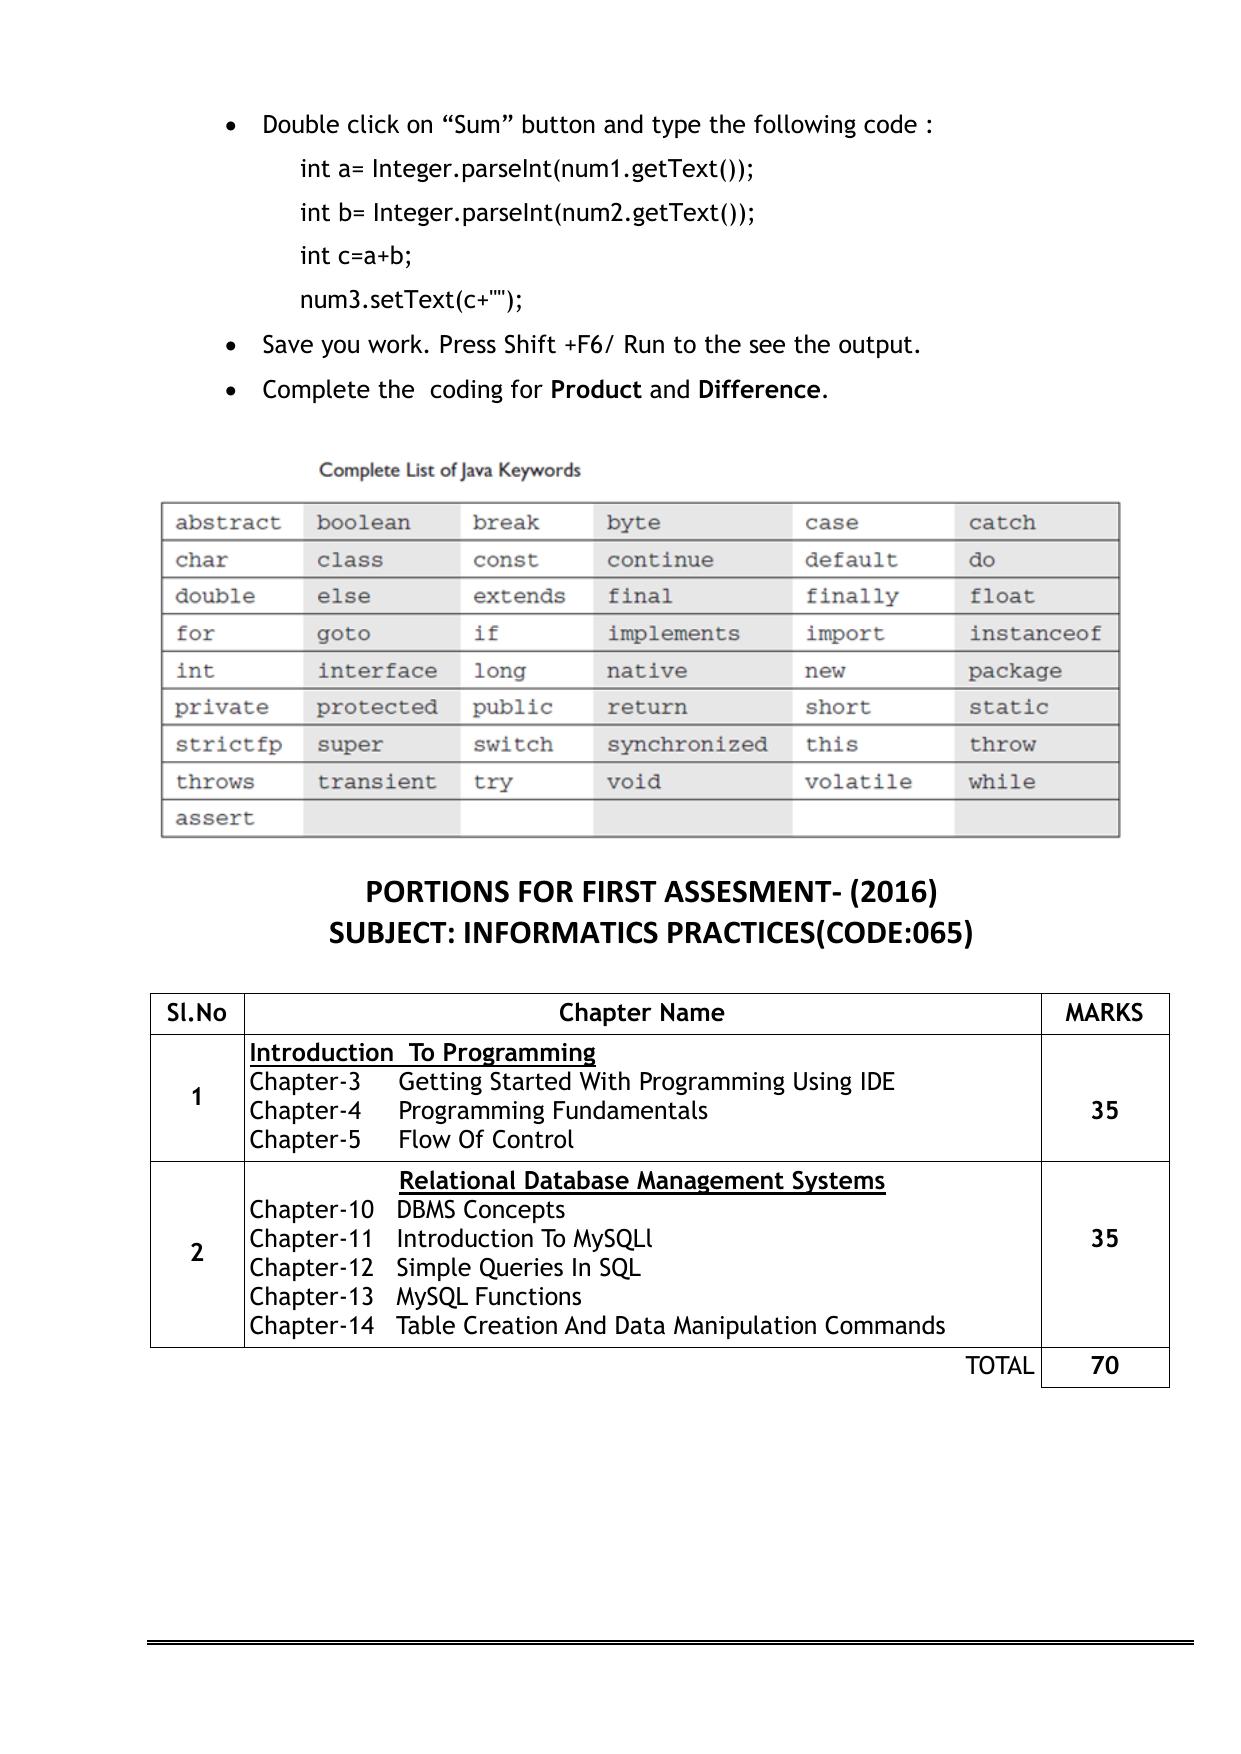 CBSE Worksheets for Class 11 Information Practices Introduction to Programming Assignment - Page 2